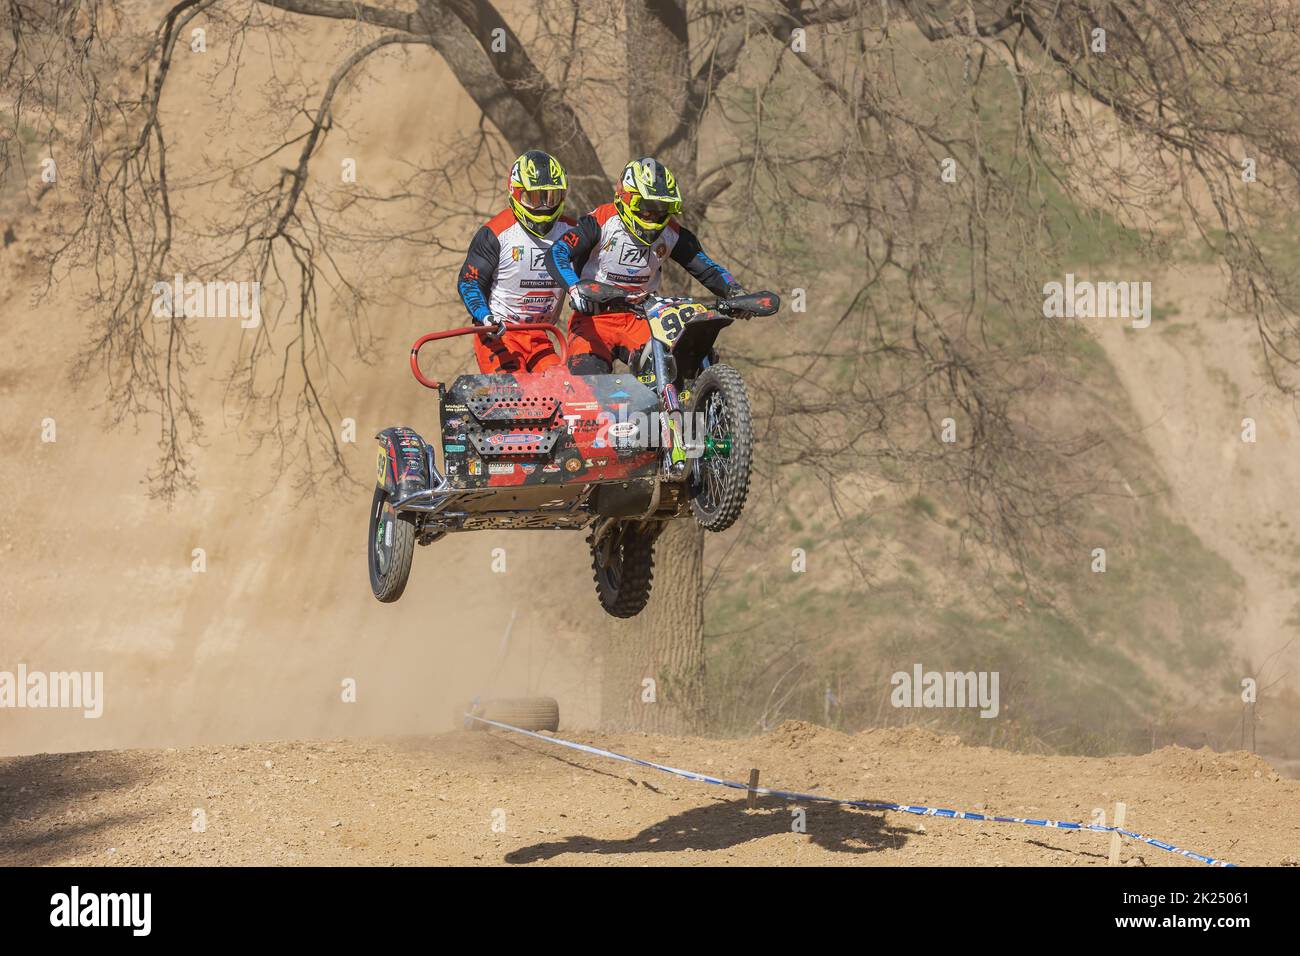 MOHELNICE, CZECH REPUBLIC - APRIL 16, 2022. Sidecacross motorbike in high jump in the 'Sidecarcross Championship of Czech Republic' on April 16, 2022 Stock Photo